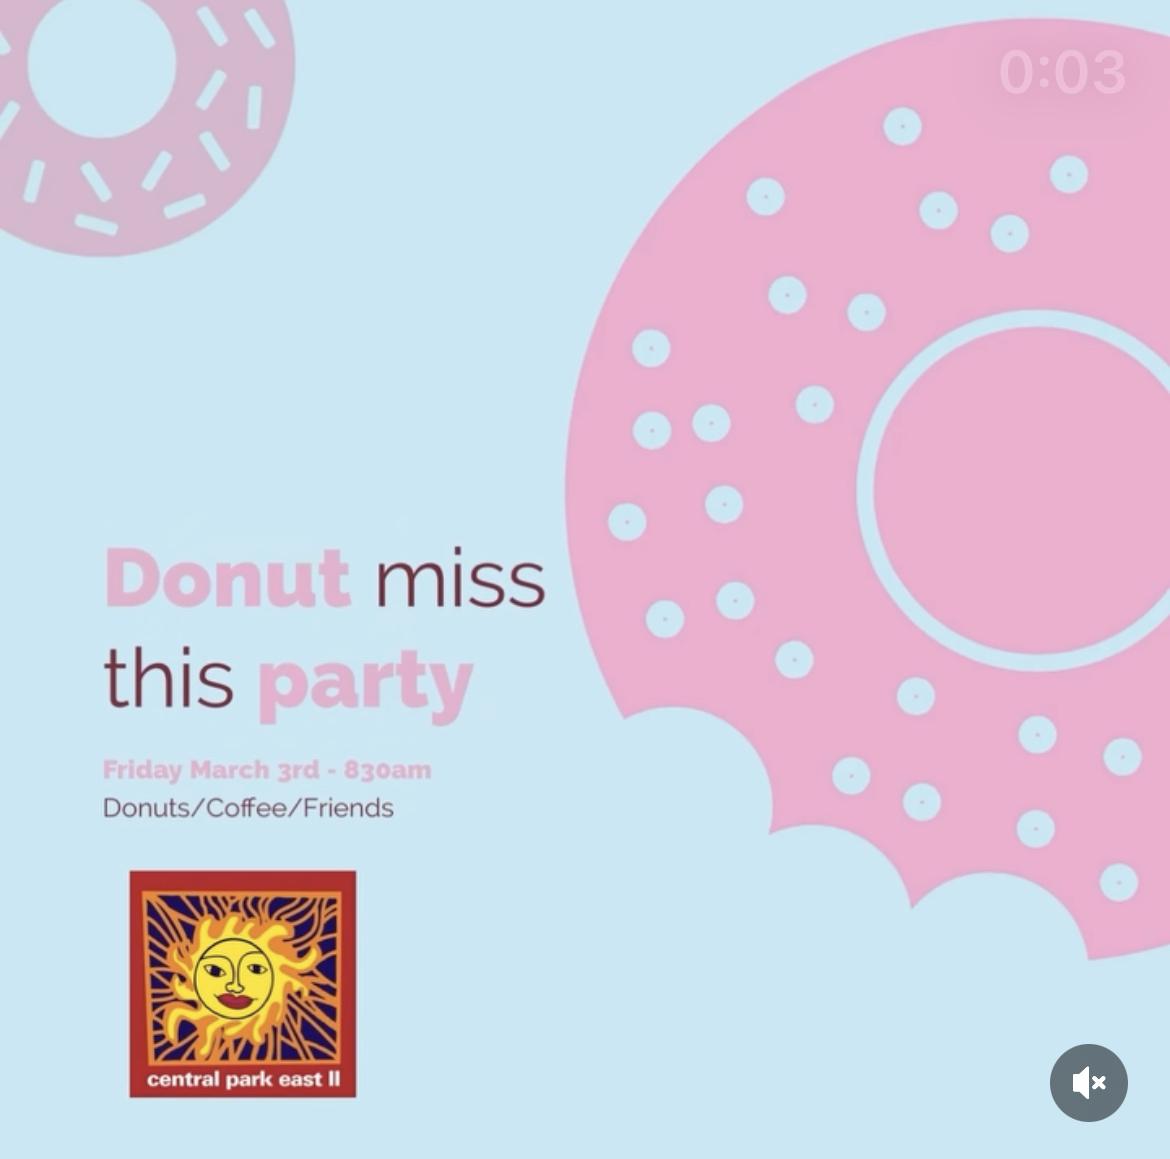 Donut Miss This Party March 3rd 8:30AM Donuts, Coffee, Friends